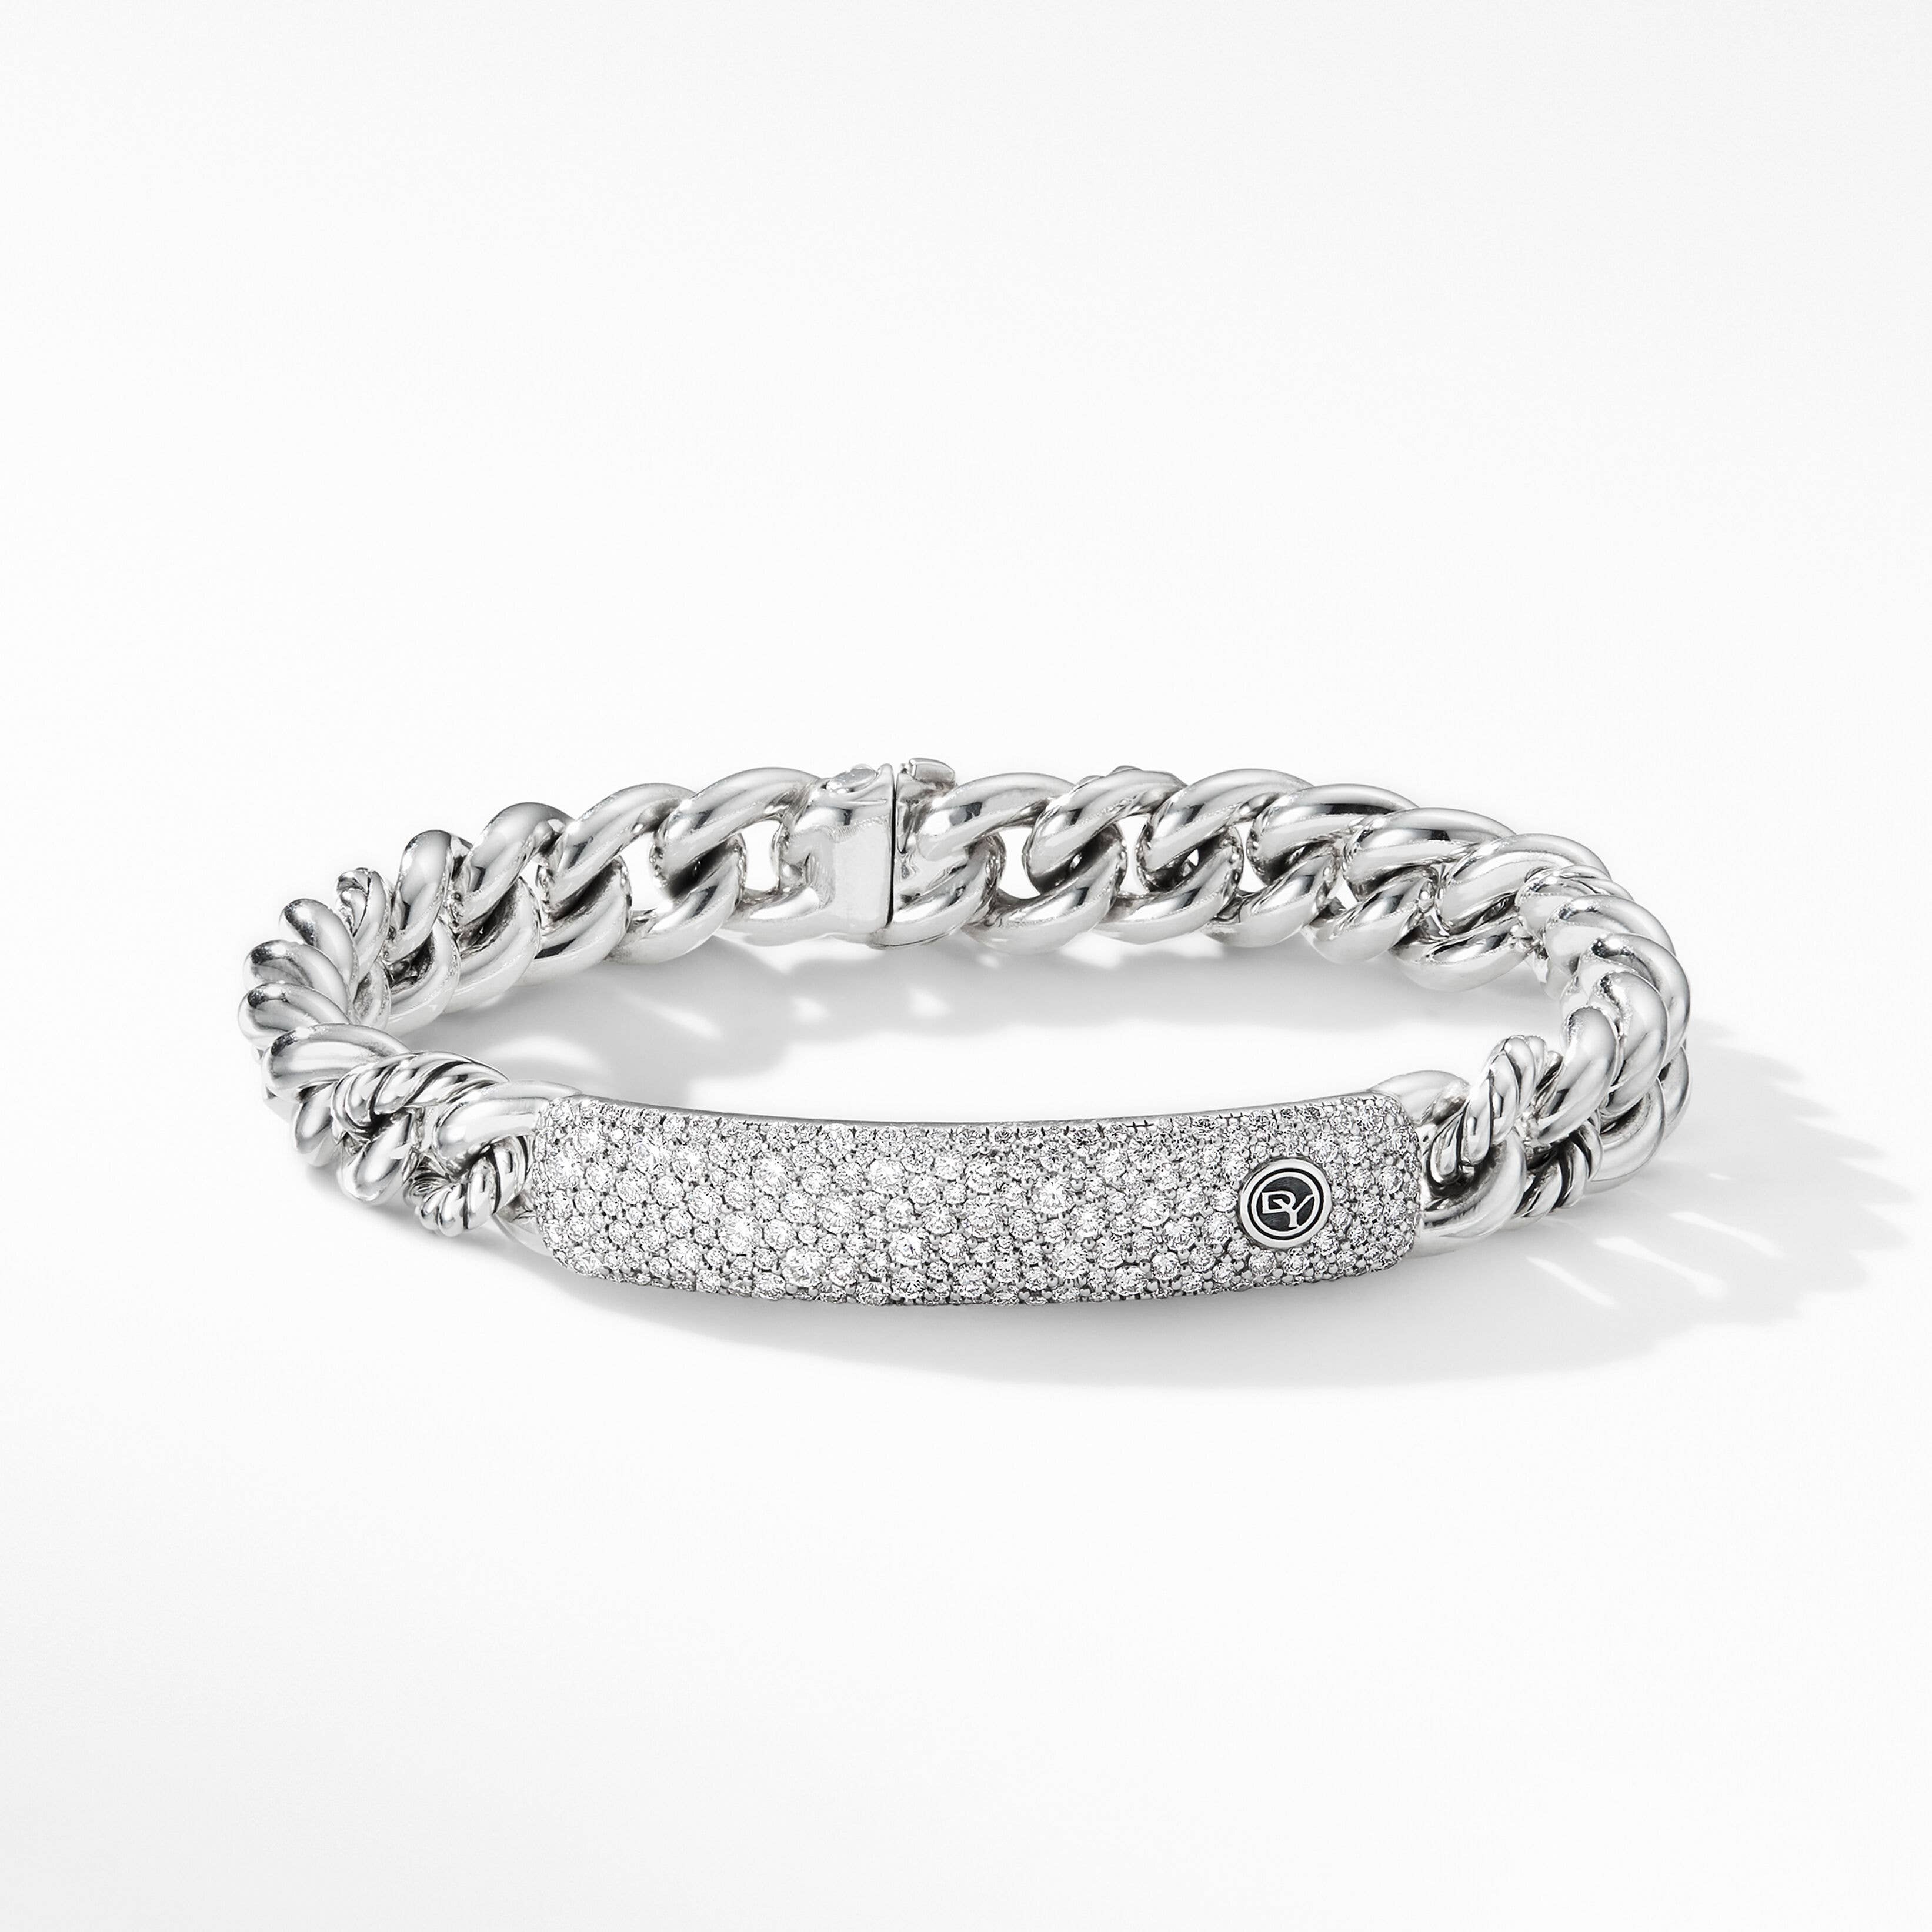 Belmont® Curb Link ID Bracelet in Sterling Silver with Pavé Diamonds